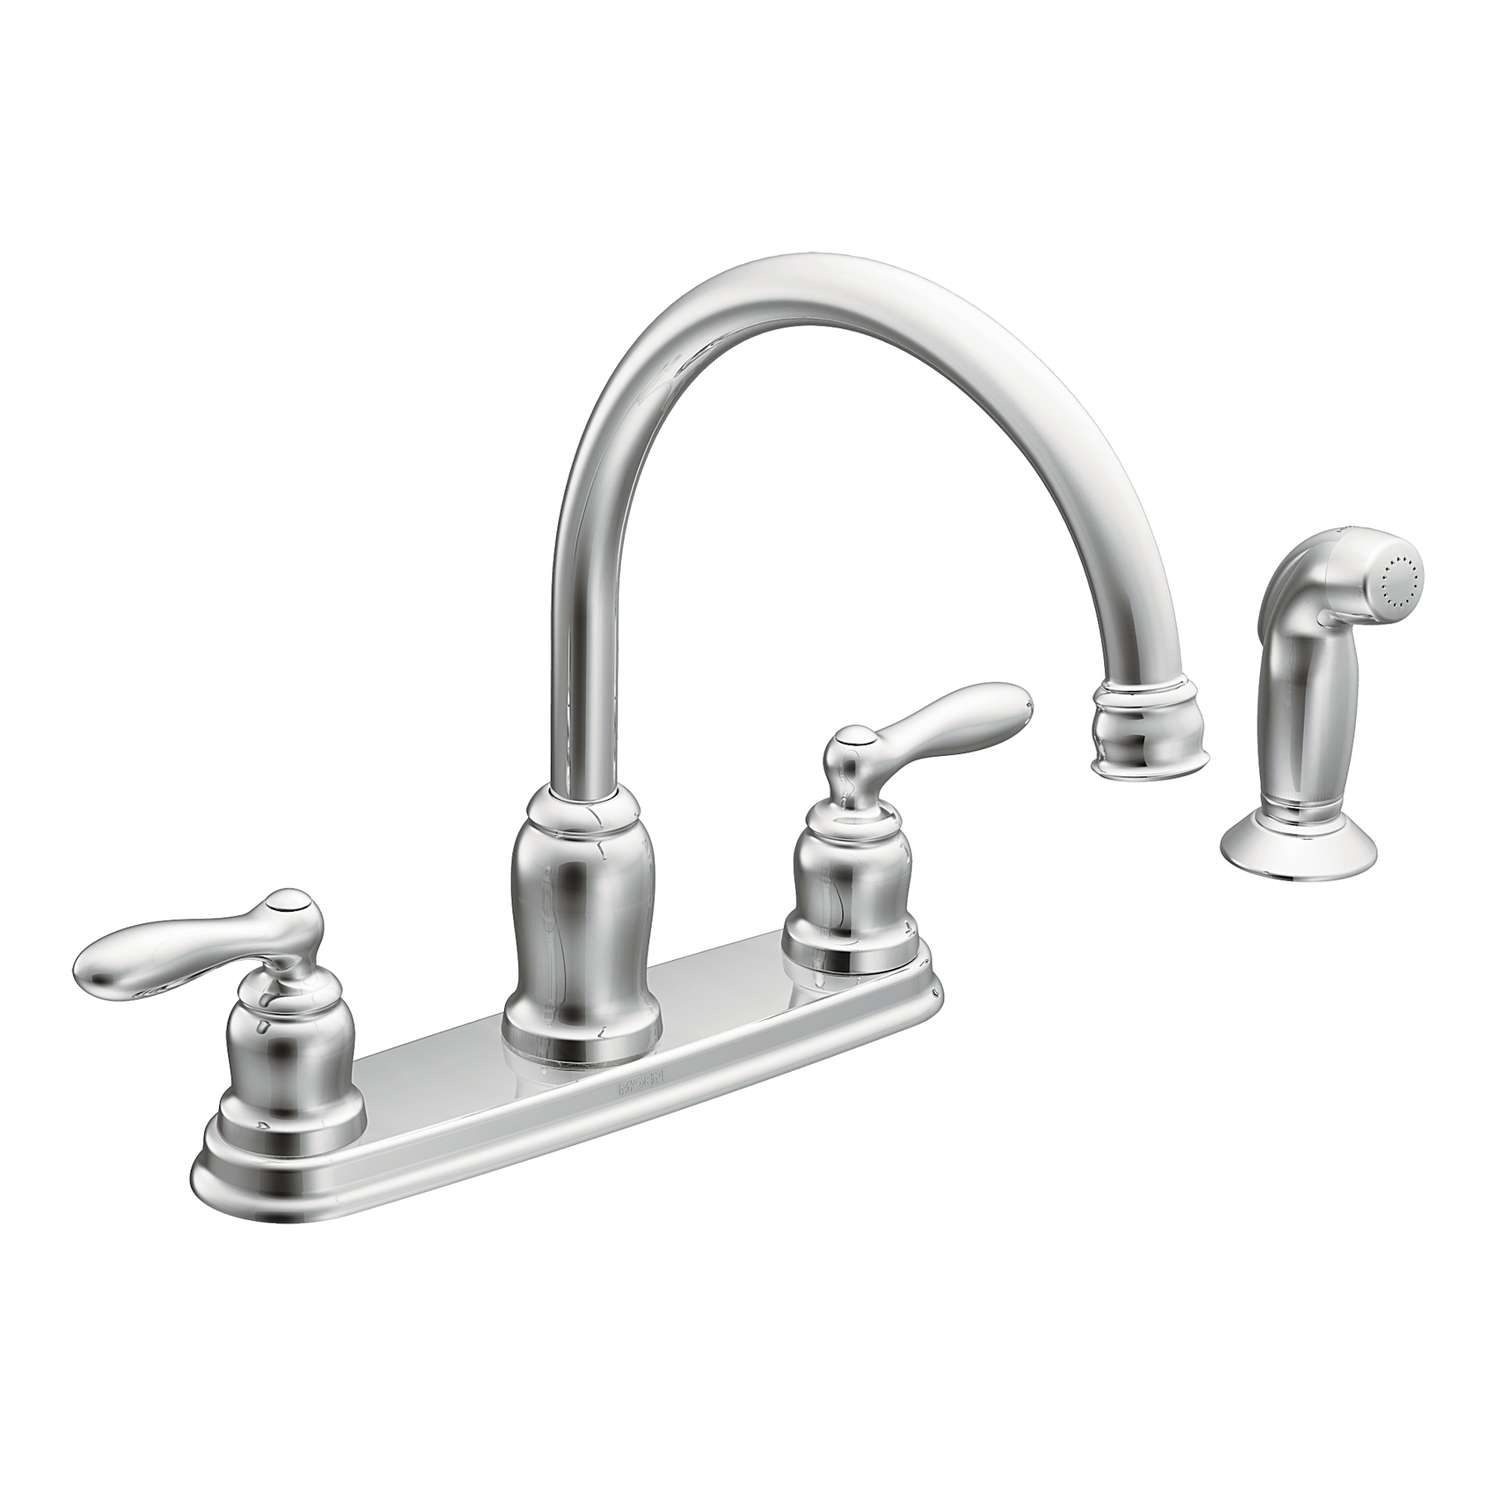 Moen Caldwell Two Handle Chrome Kitchen Faucet Side